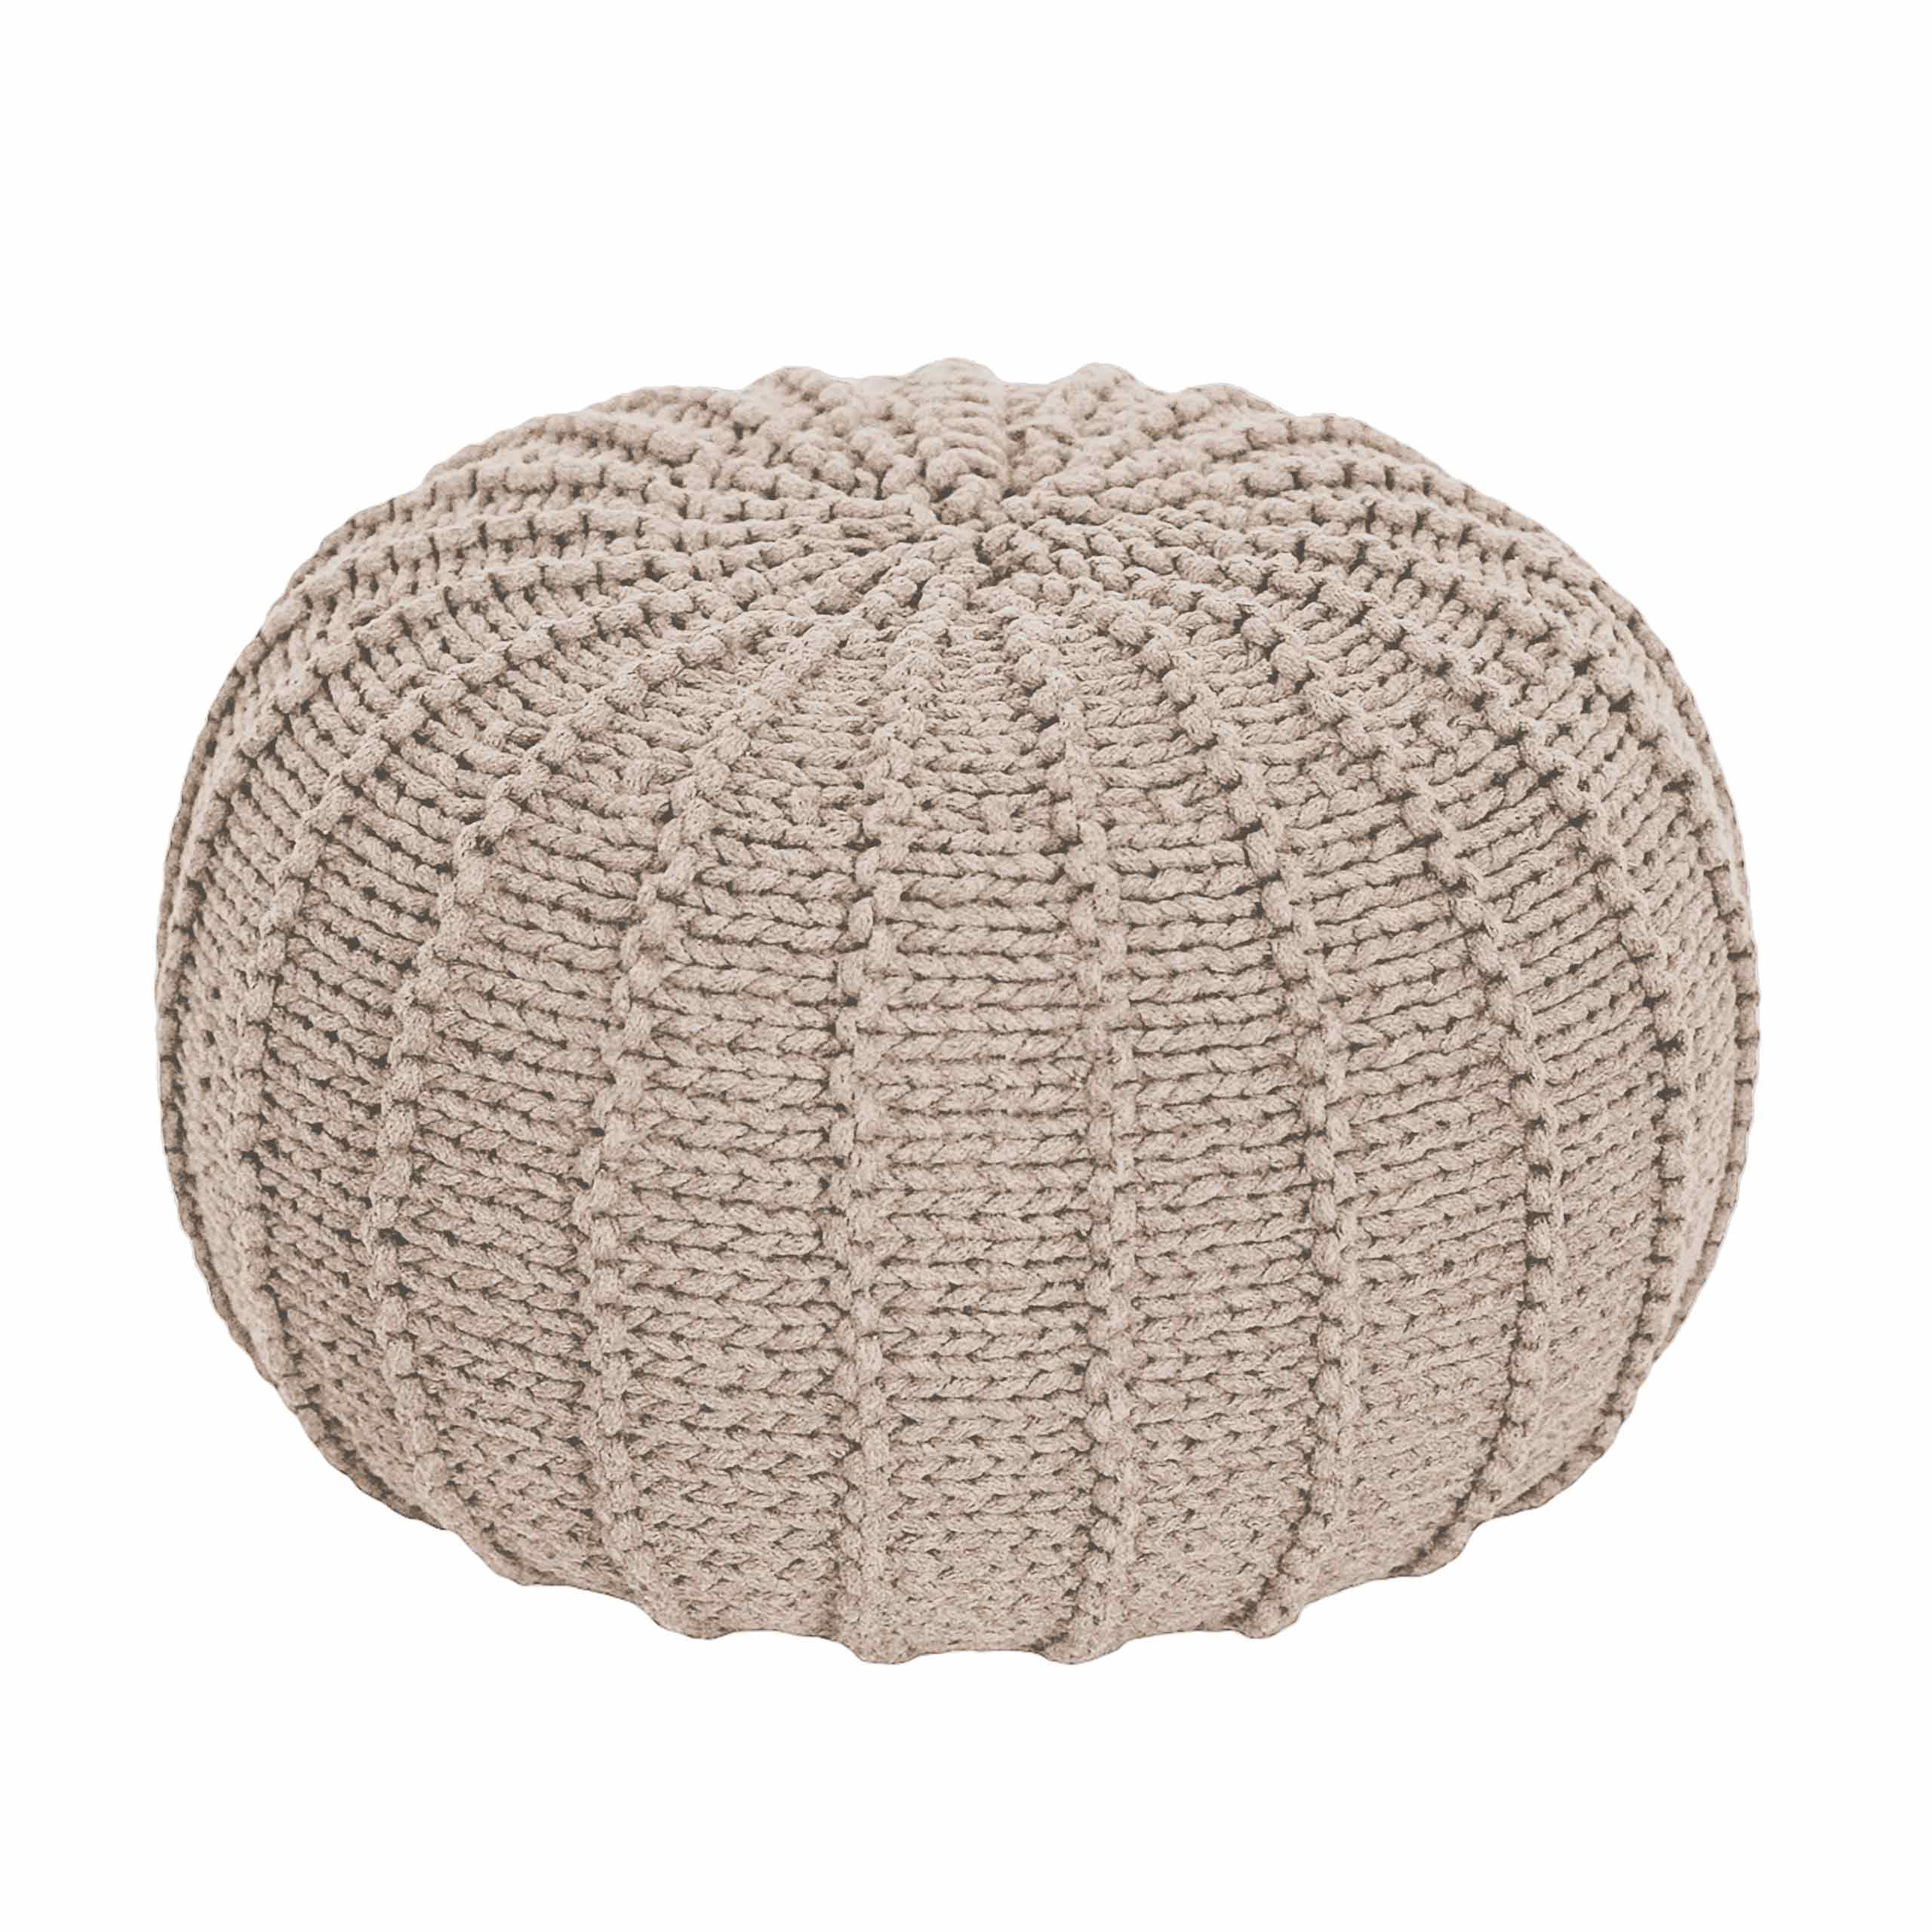 Knitted pouffe, Small | BEIGE - Zuri House